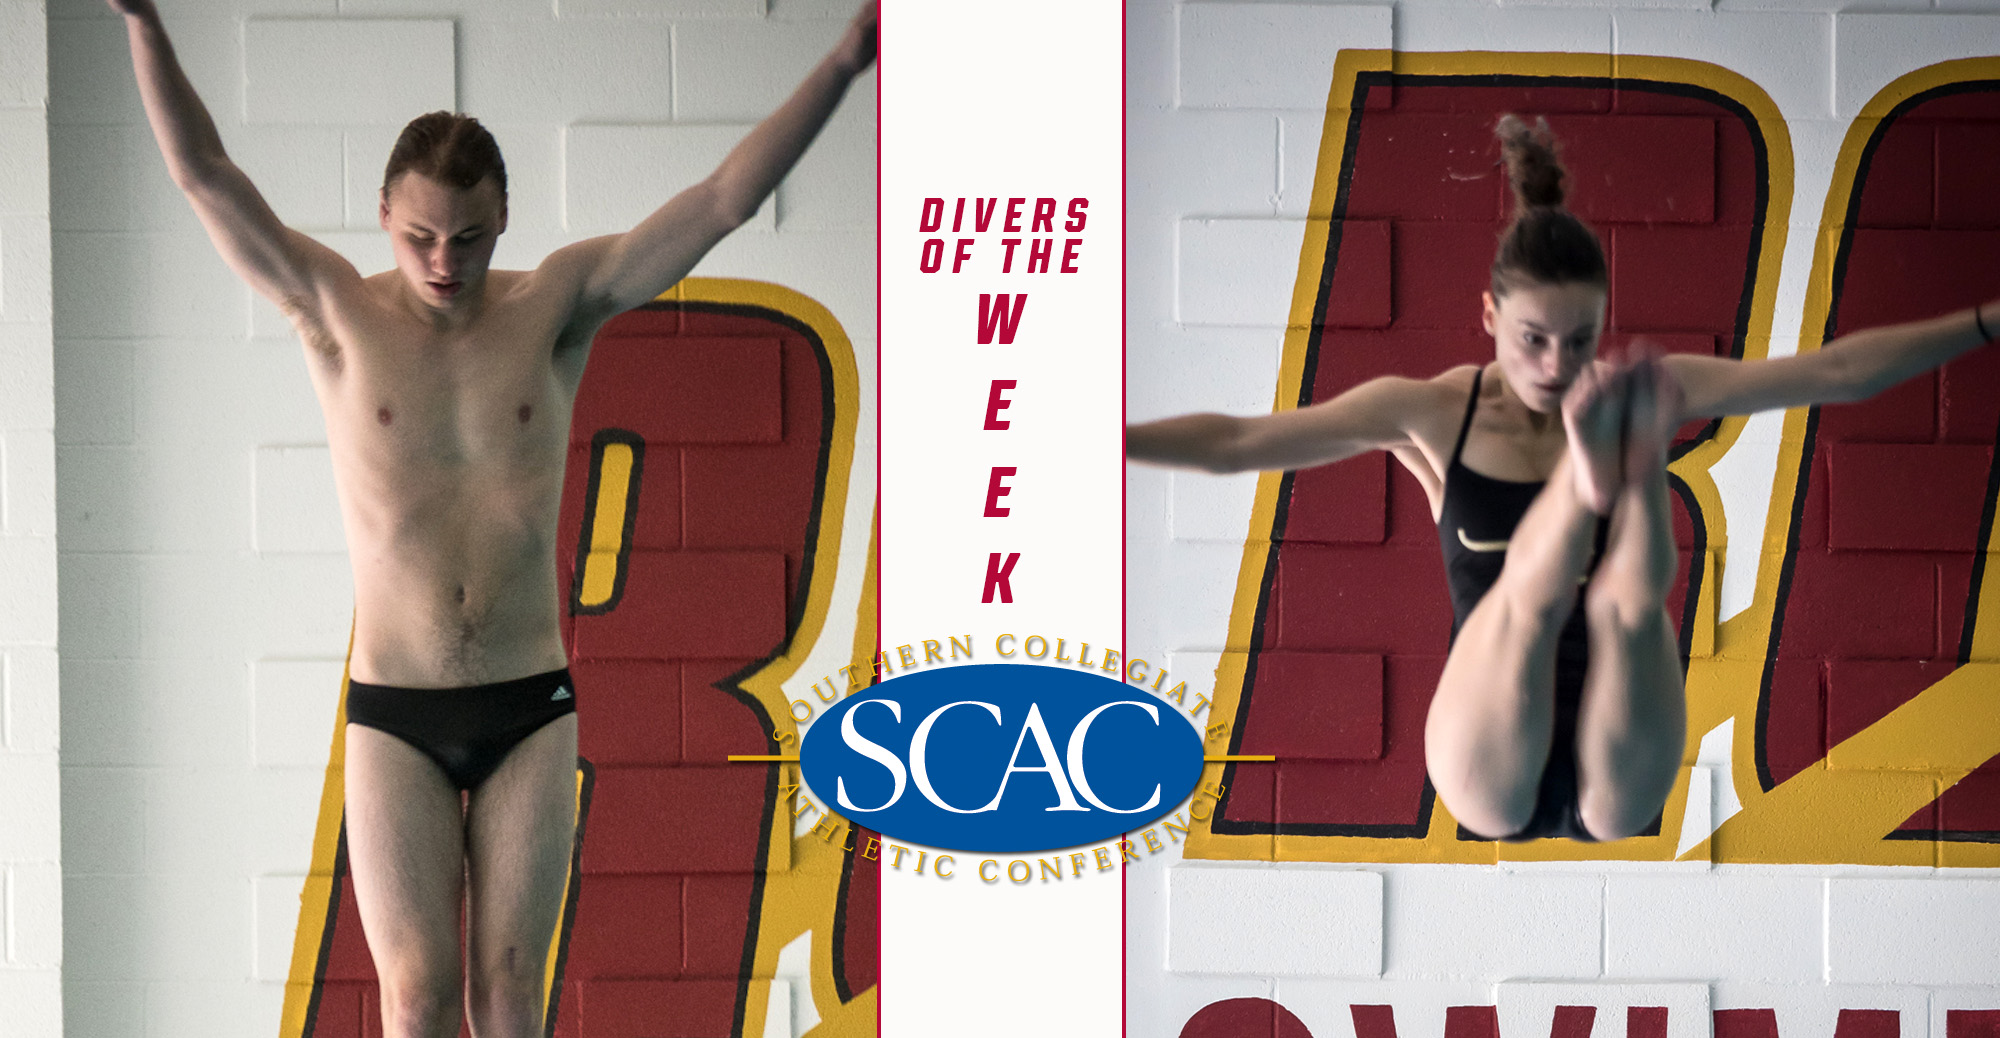 Baker, Tuttle Named SCAC Divers of the Week